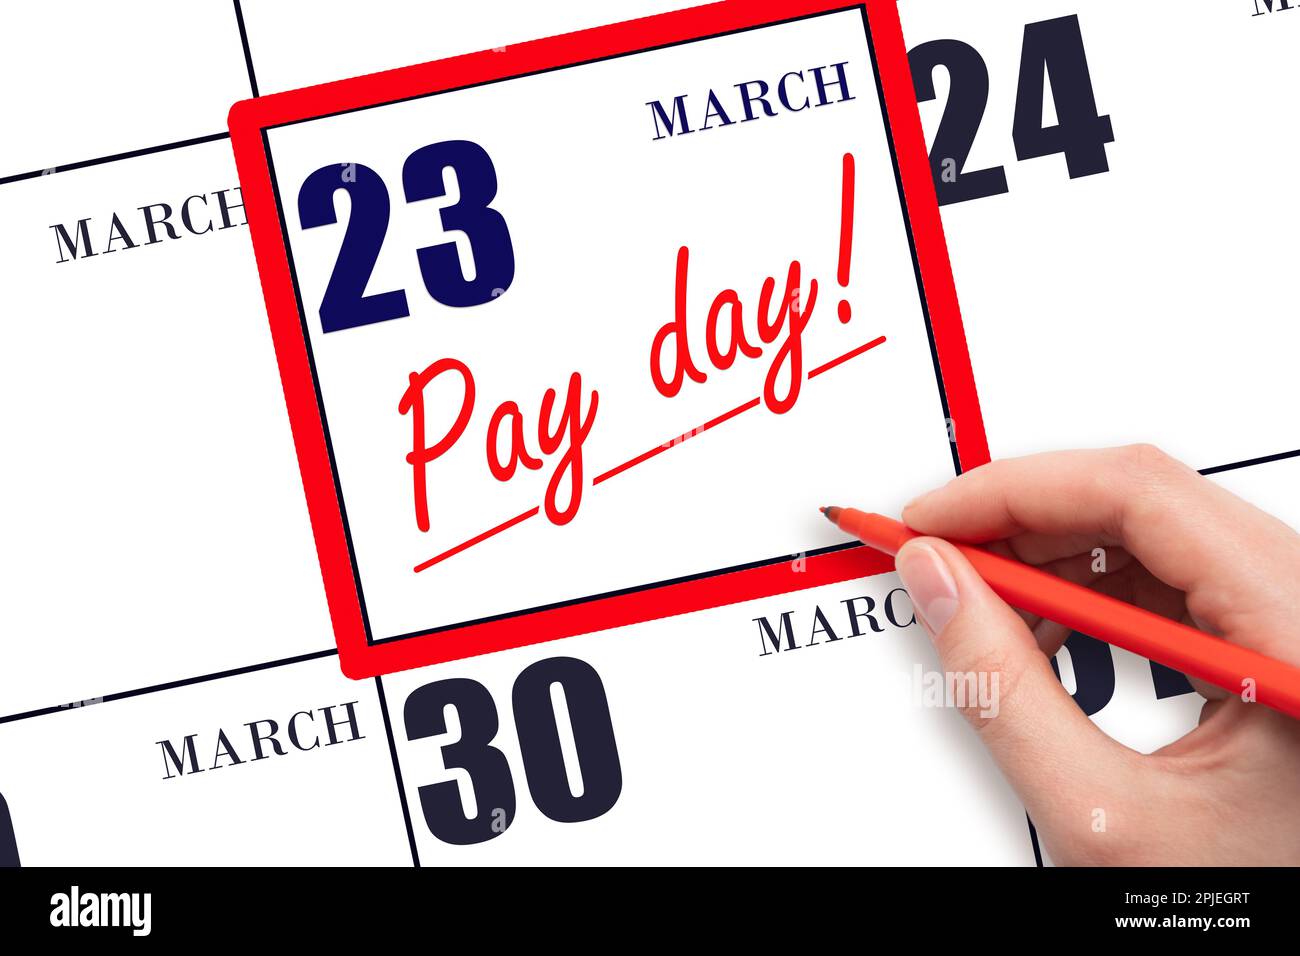 23rd day of March. Hand writing text PAY DATE on calendar date March 23 and underline it. Payment due date. Reminder concept of payment. Spring month, Stock Photo